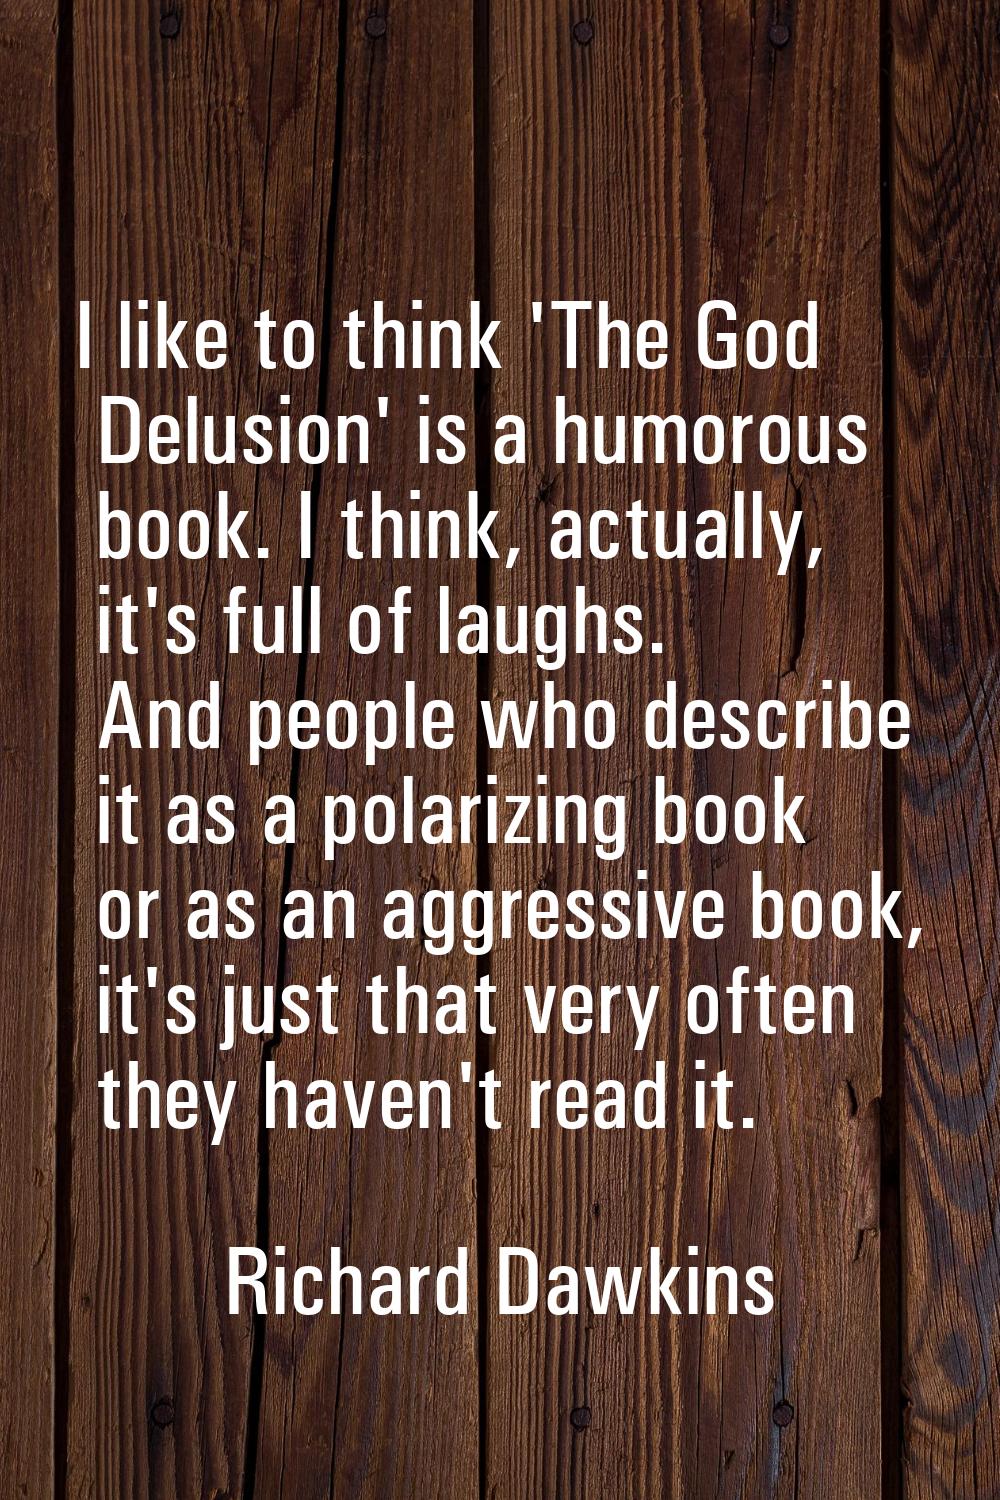 I like to think 'The God Delusion' is a humorous book. I think, actually, it's full of laughs. And 